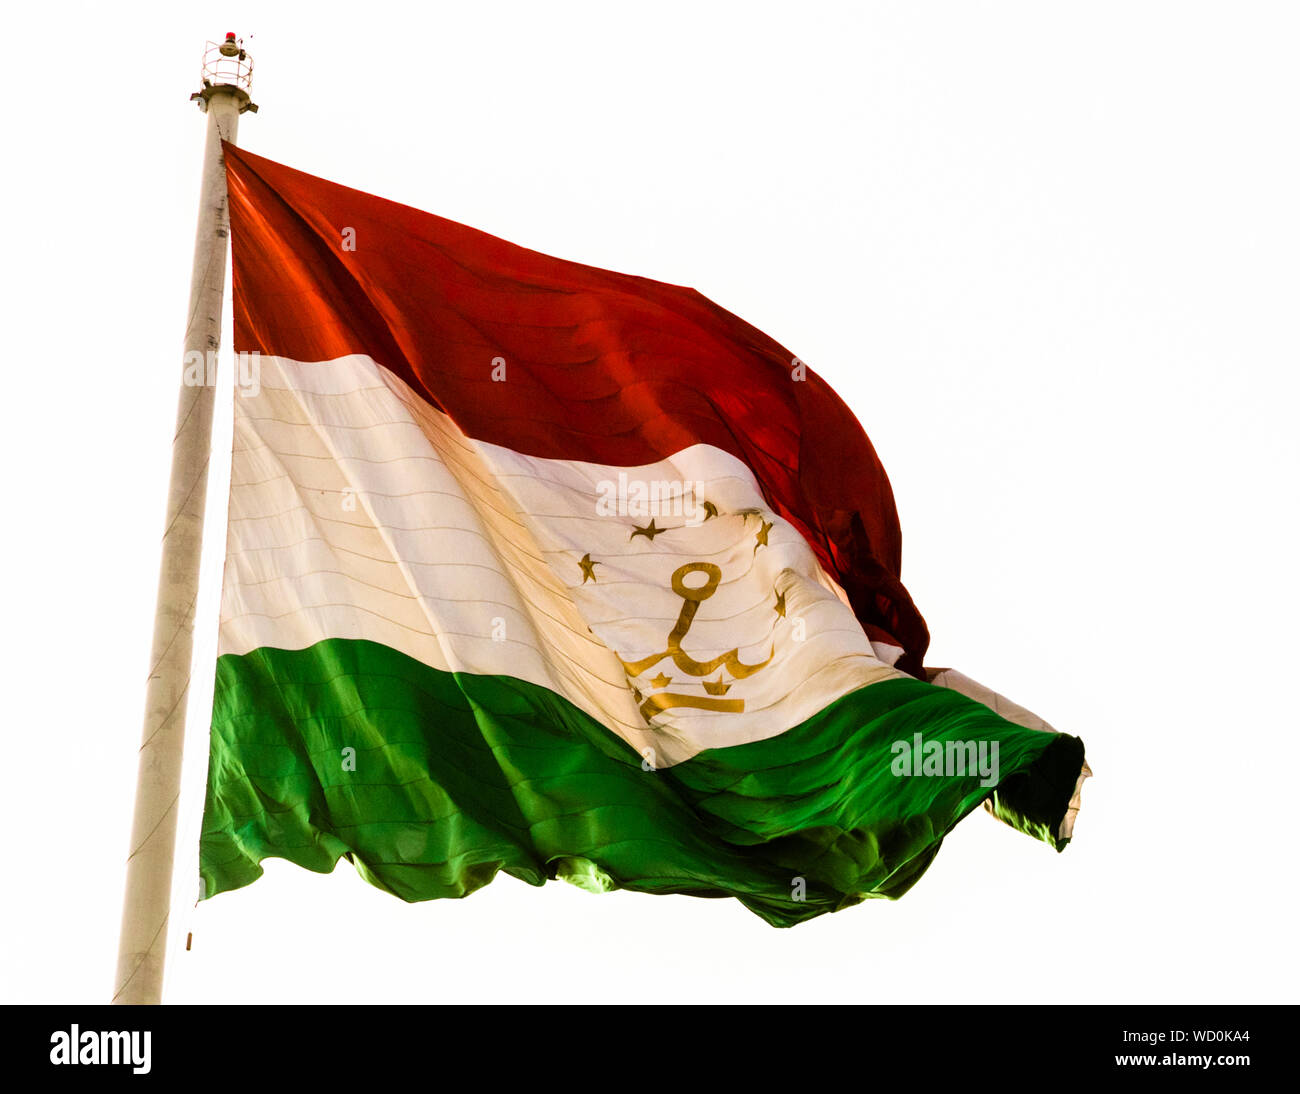 A golden crown and stars decorate the flag of Tajikistan flying on a 165-meter flagpole in Dushanbe in Rudaki- Park of Dushanbe, Tajikistan Stock Photo